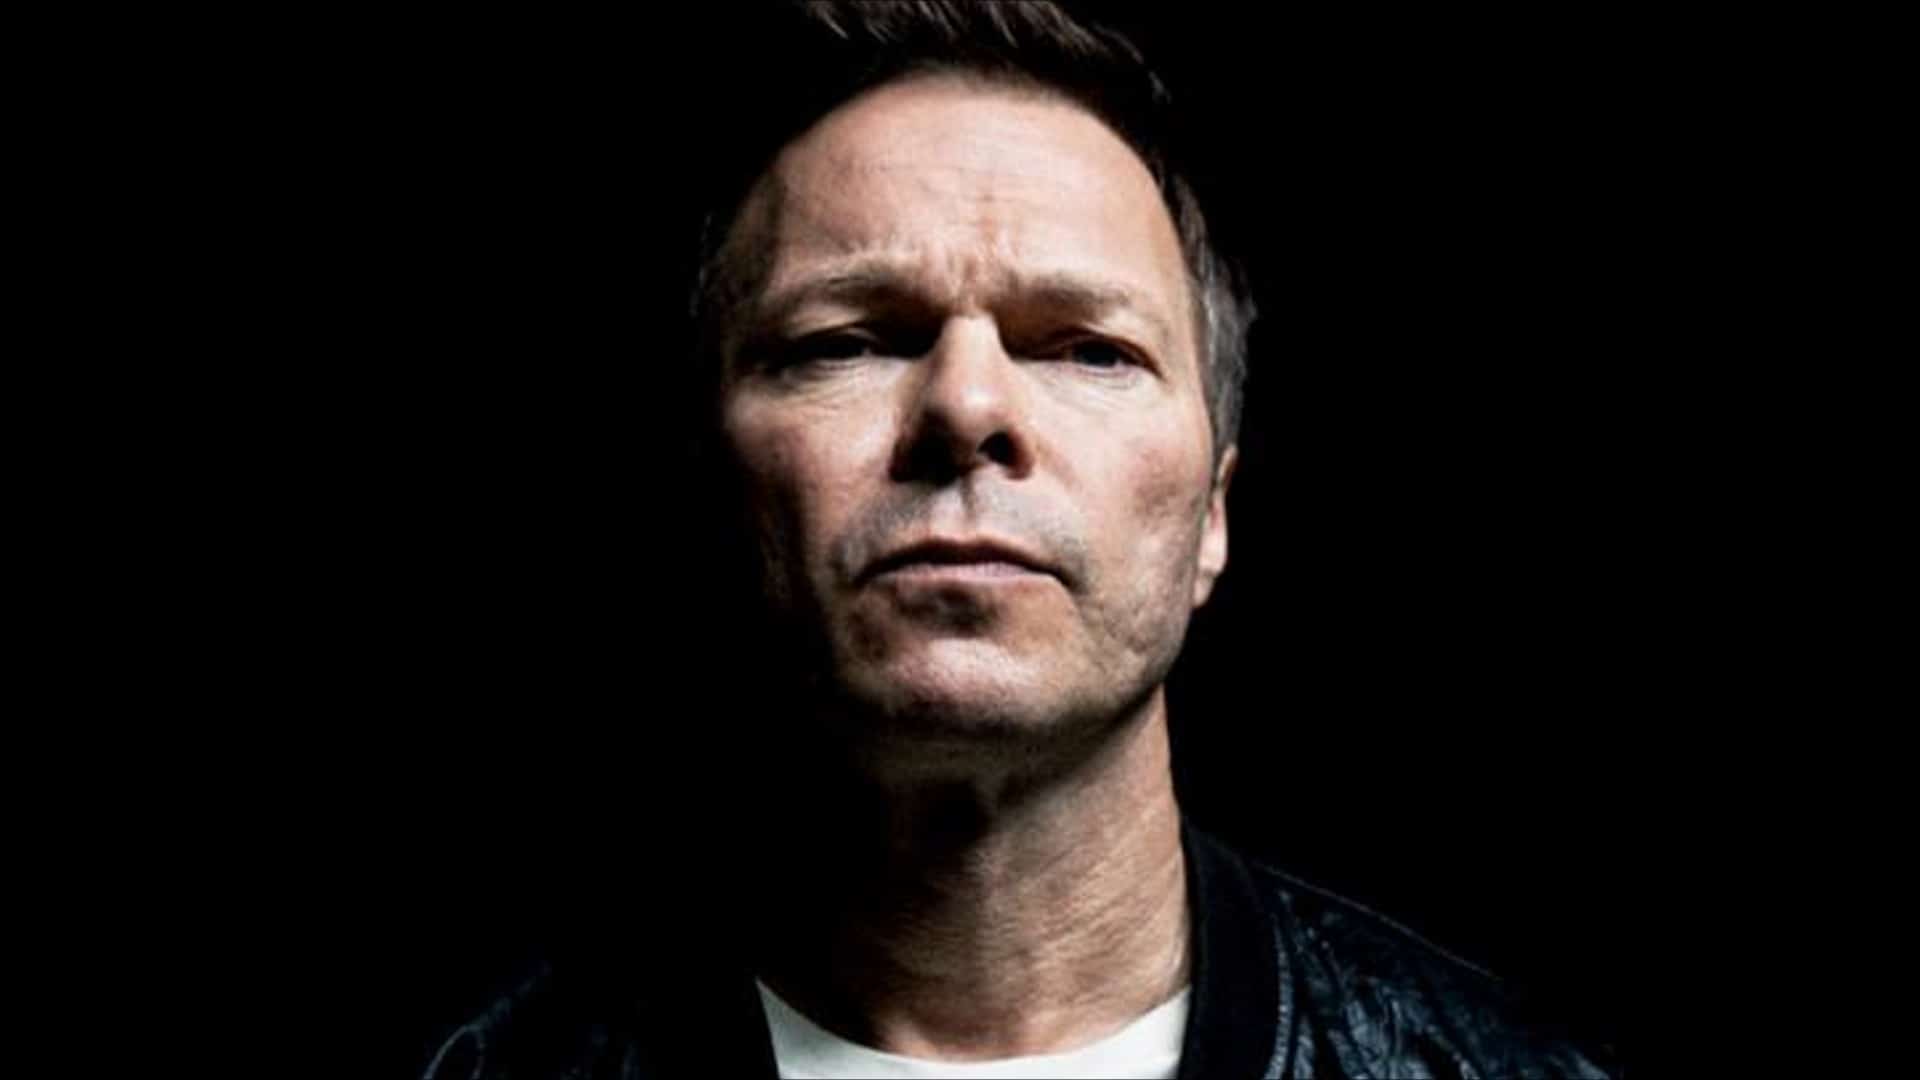 International Music Summit launches 'The Big Questions' hosted by Pete Tong and Jaguar